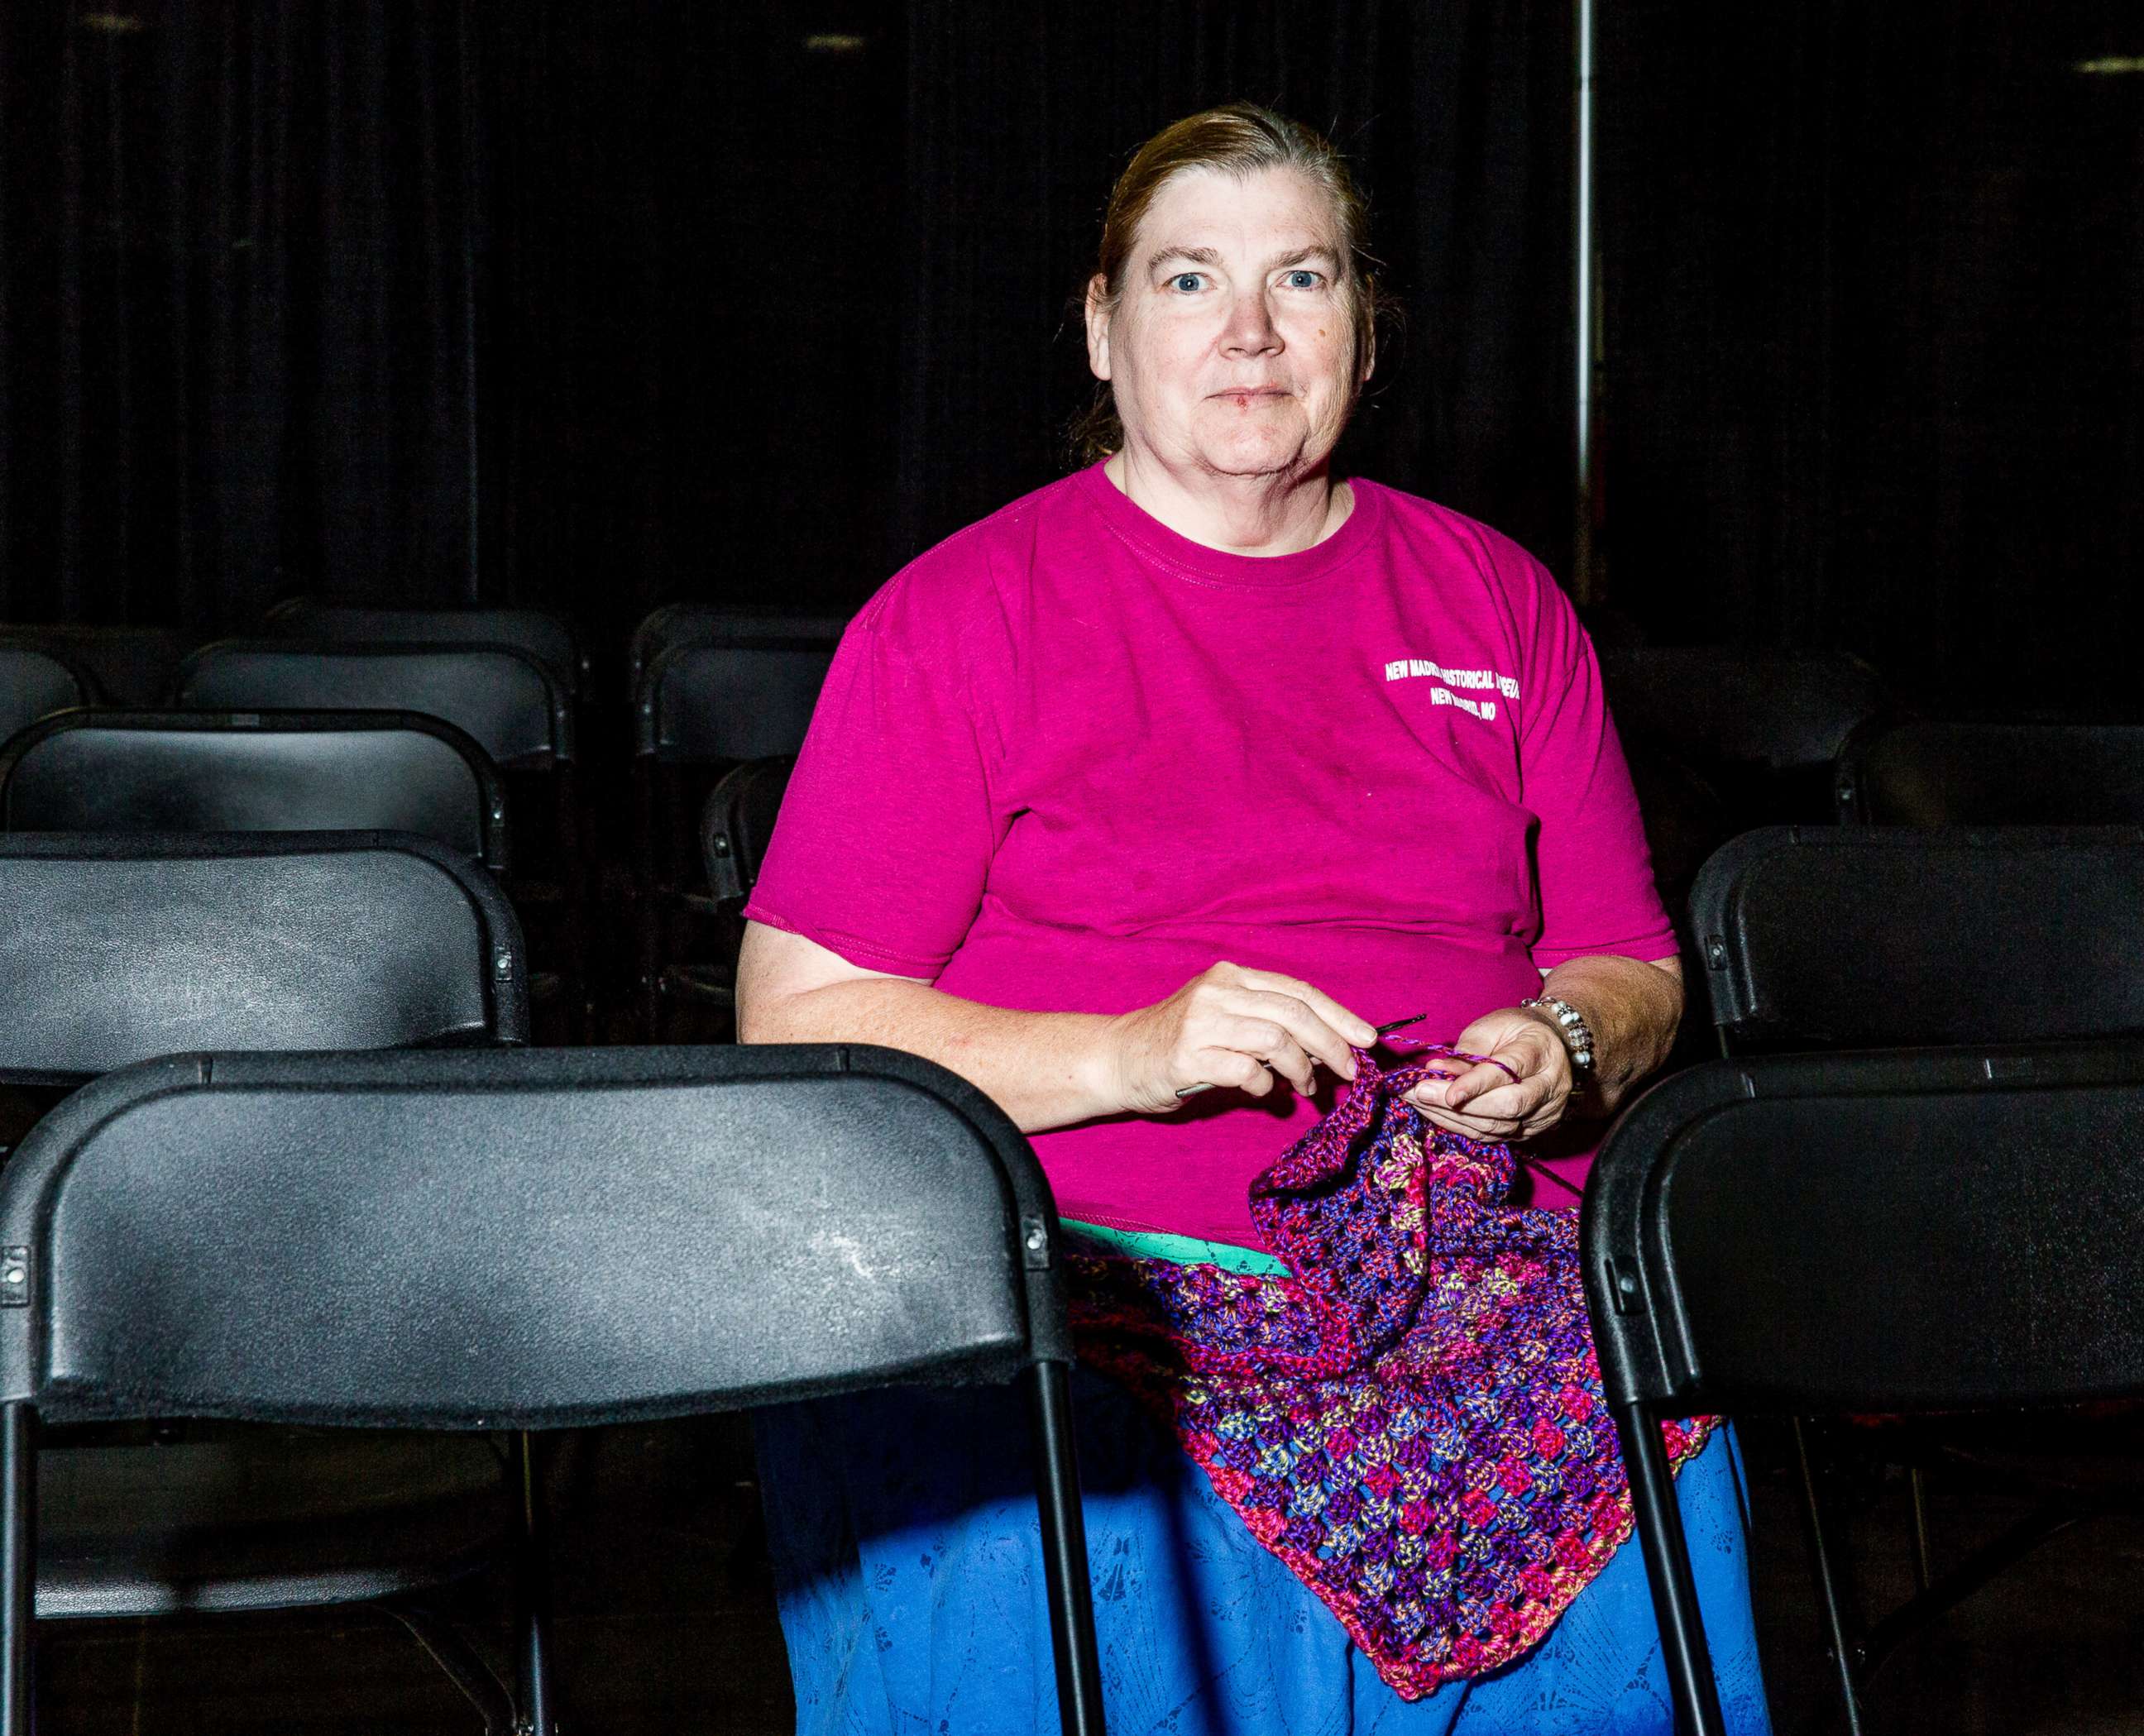 PHOTO: Kathy Pierce knits in a sitting area.